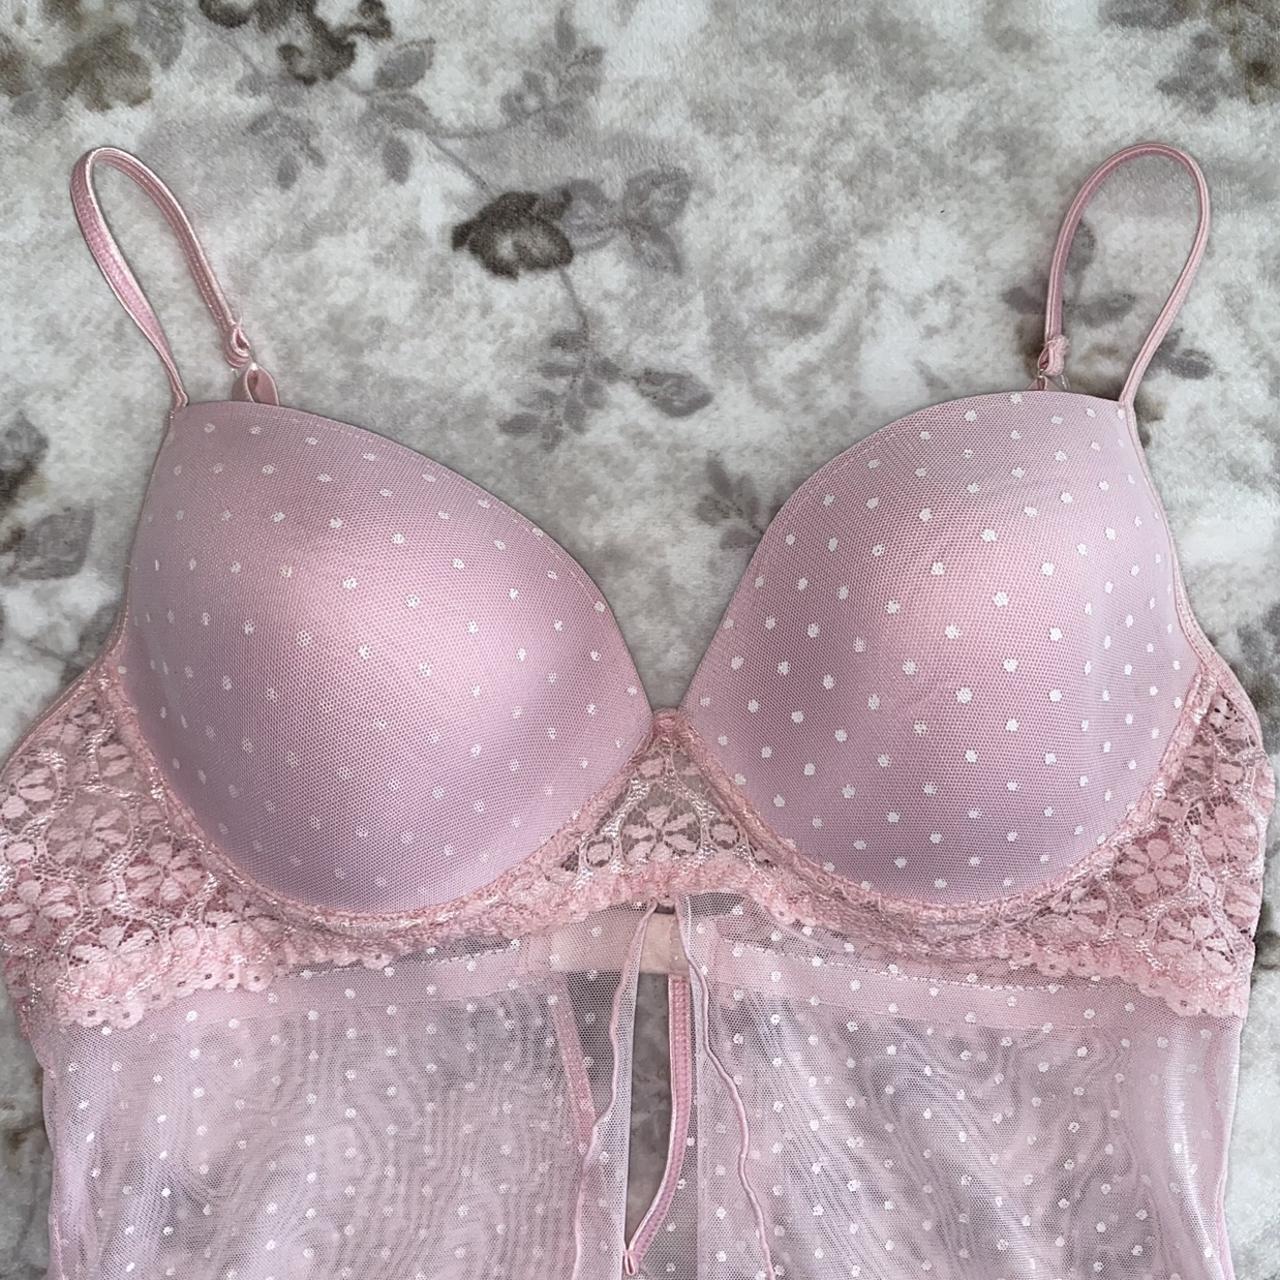 Product Image 1 - Dainty Baby Pink lingerie piece

38C